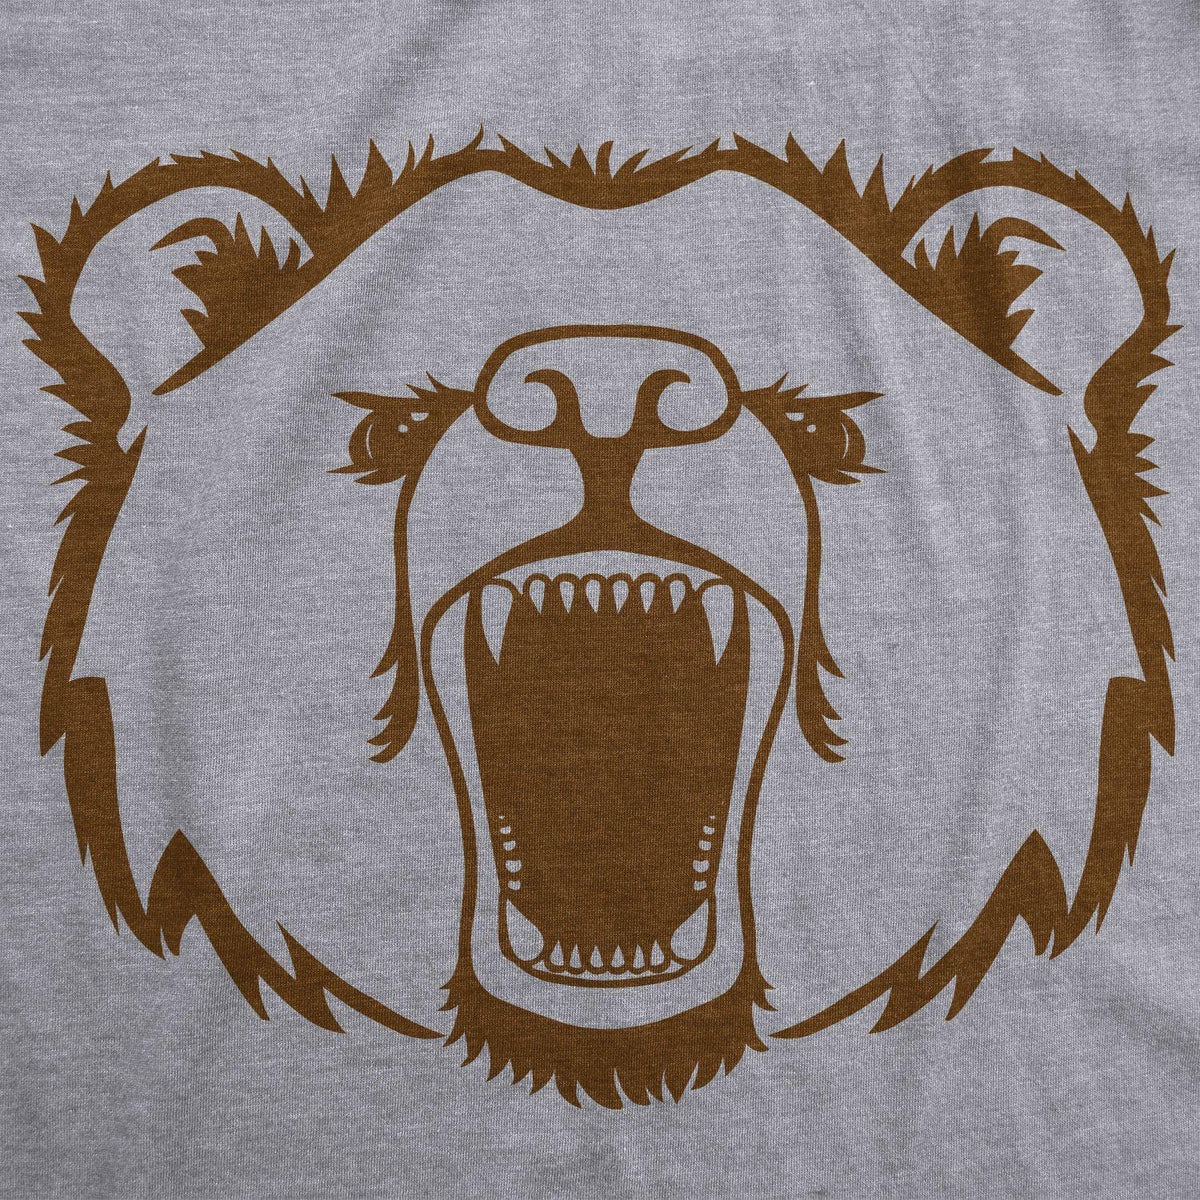 Ask Me About My Bear Men&#39;s Tshirt - Crazy Dog T-Shirts